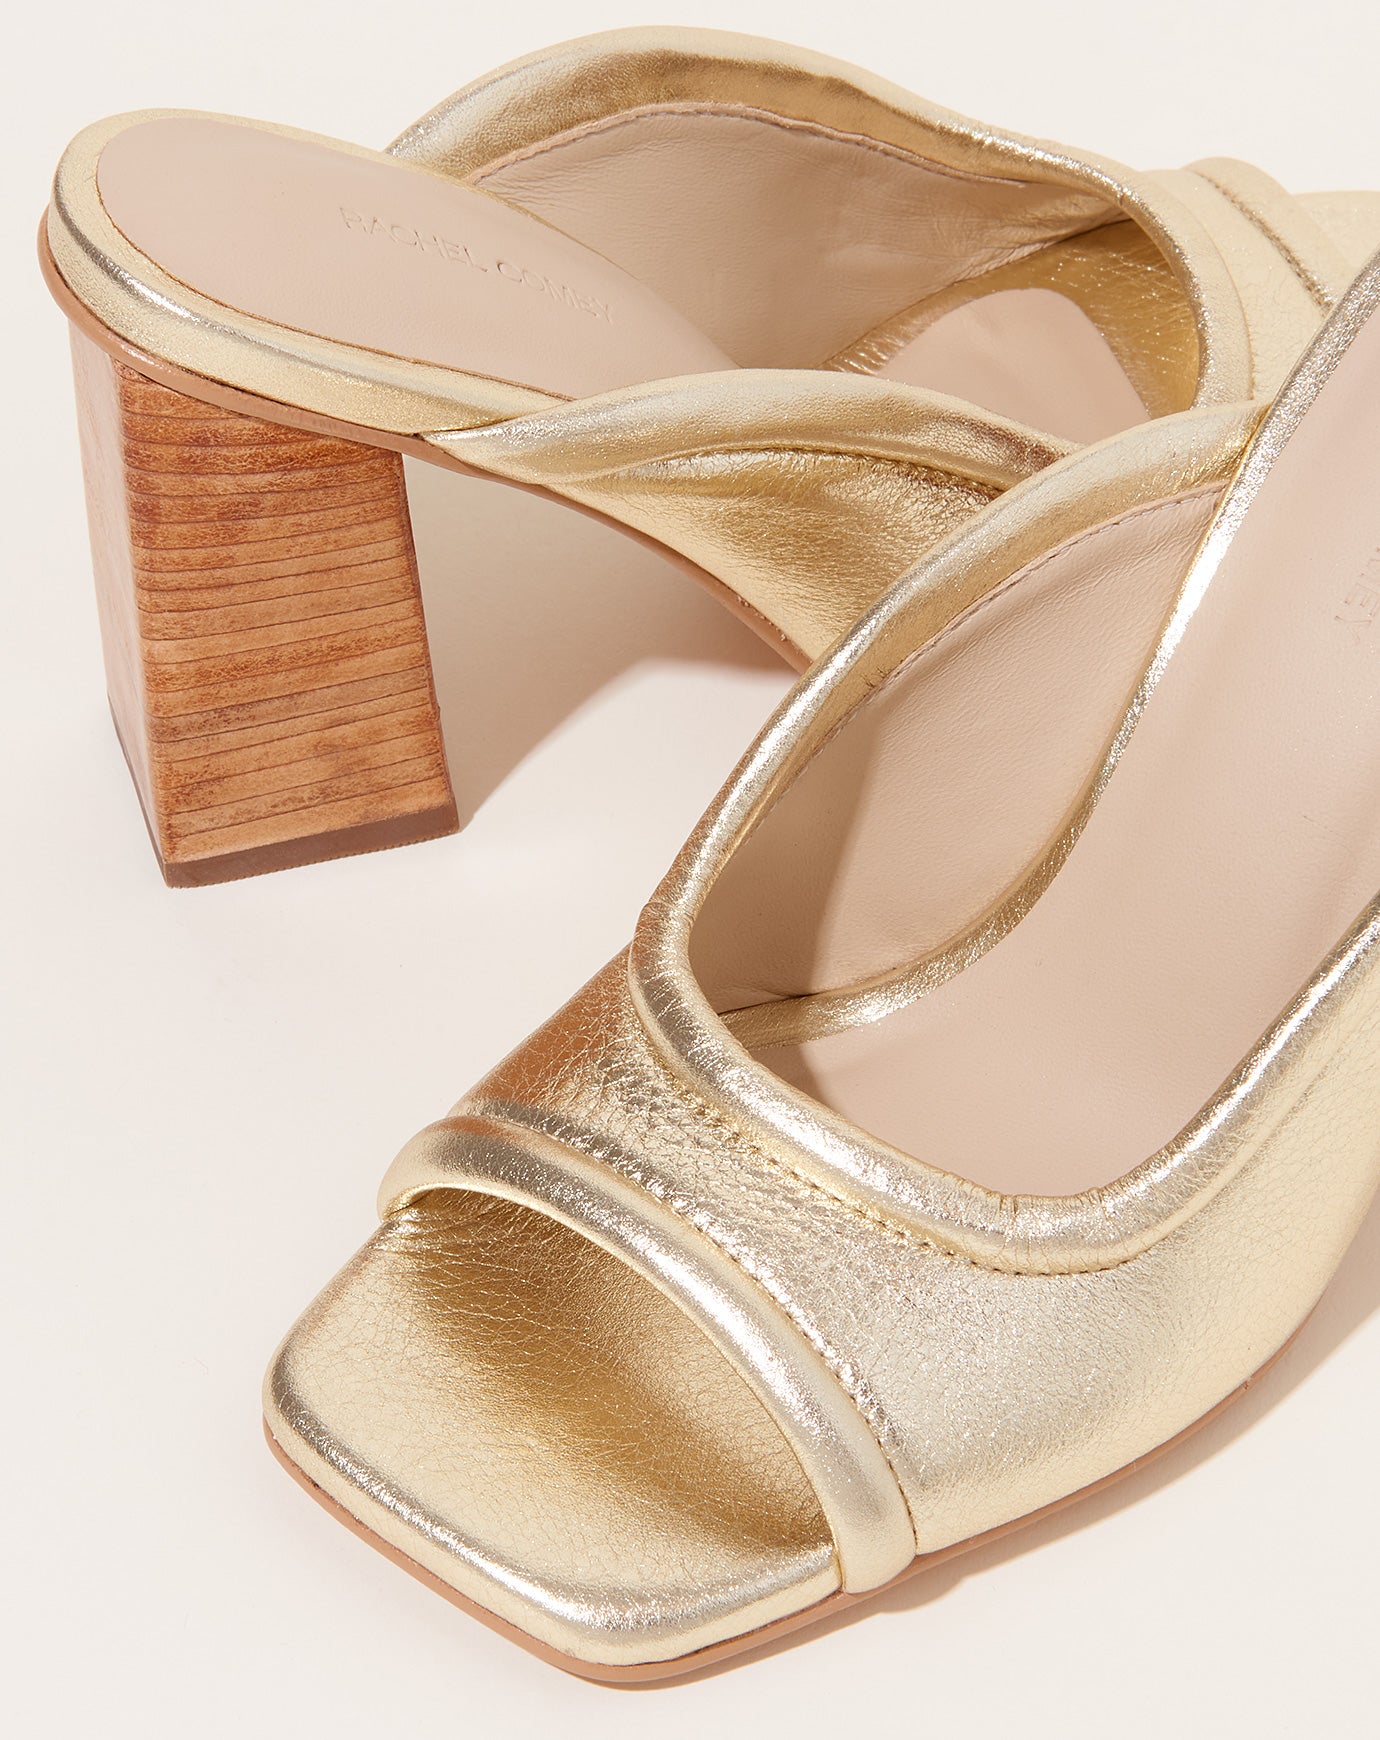 Rachel Comey Anora Sandal in Old Gold